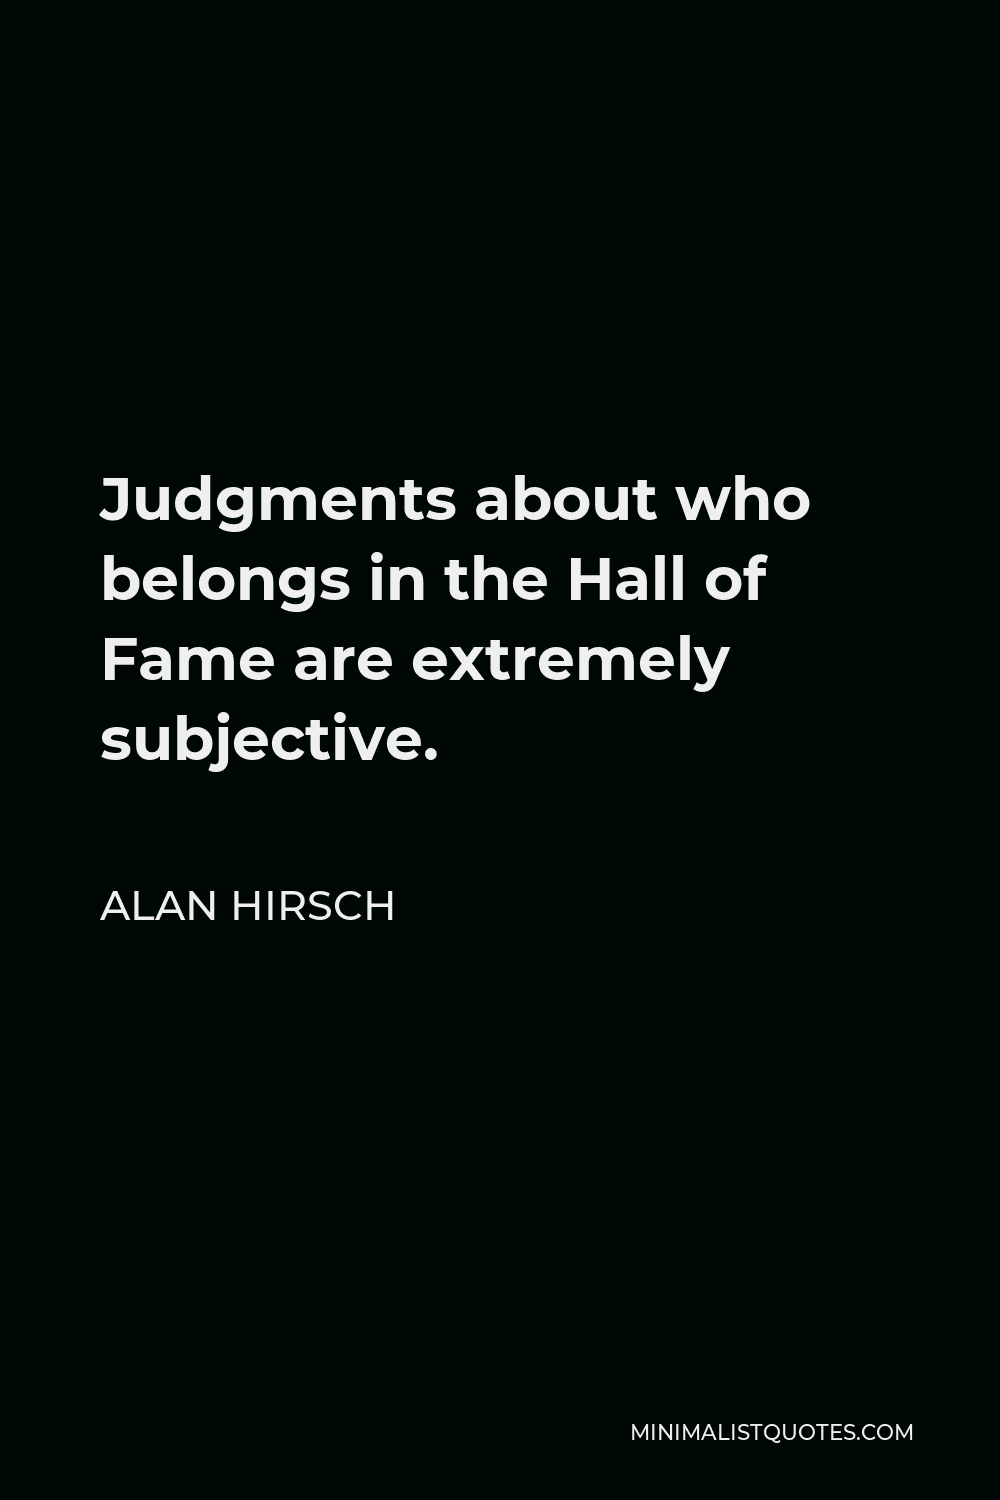 Alan Hirsch Quote - Judgments about who belongs in the Hall of Fame are extremely subjective.